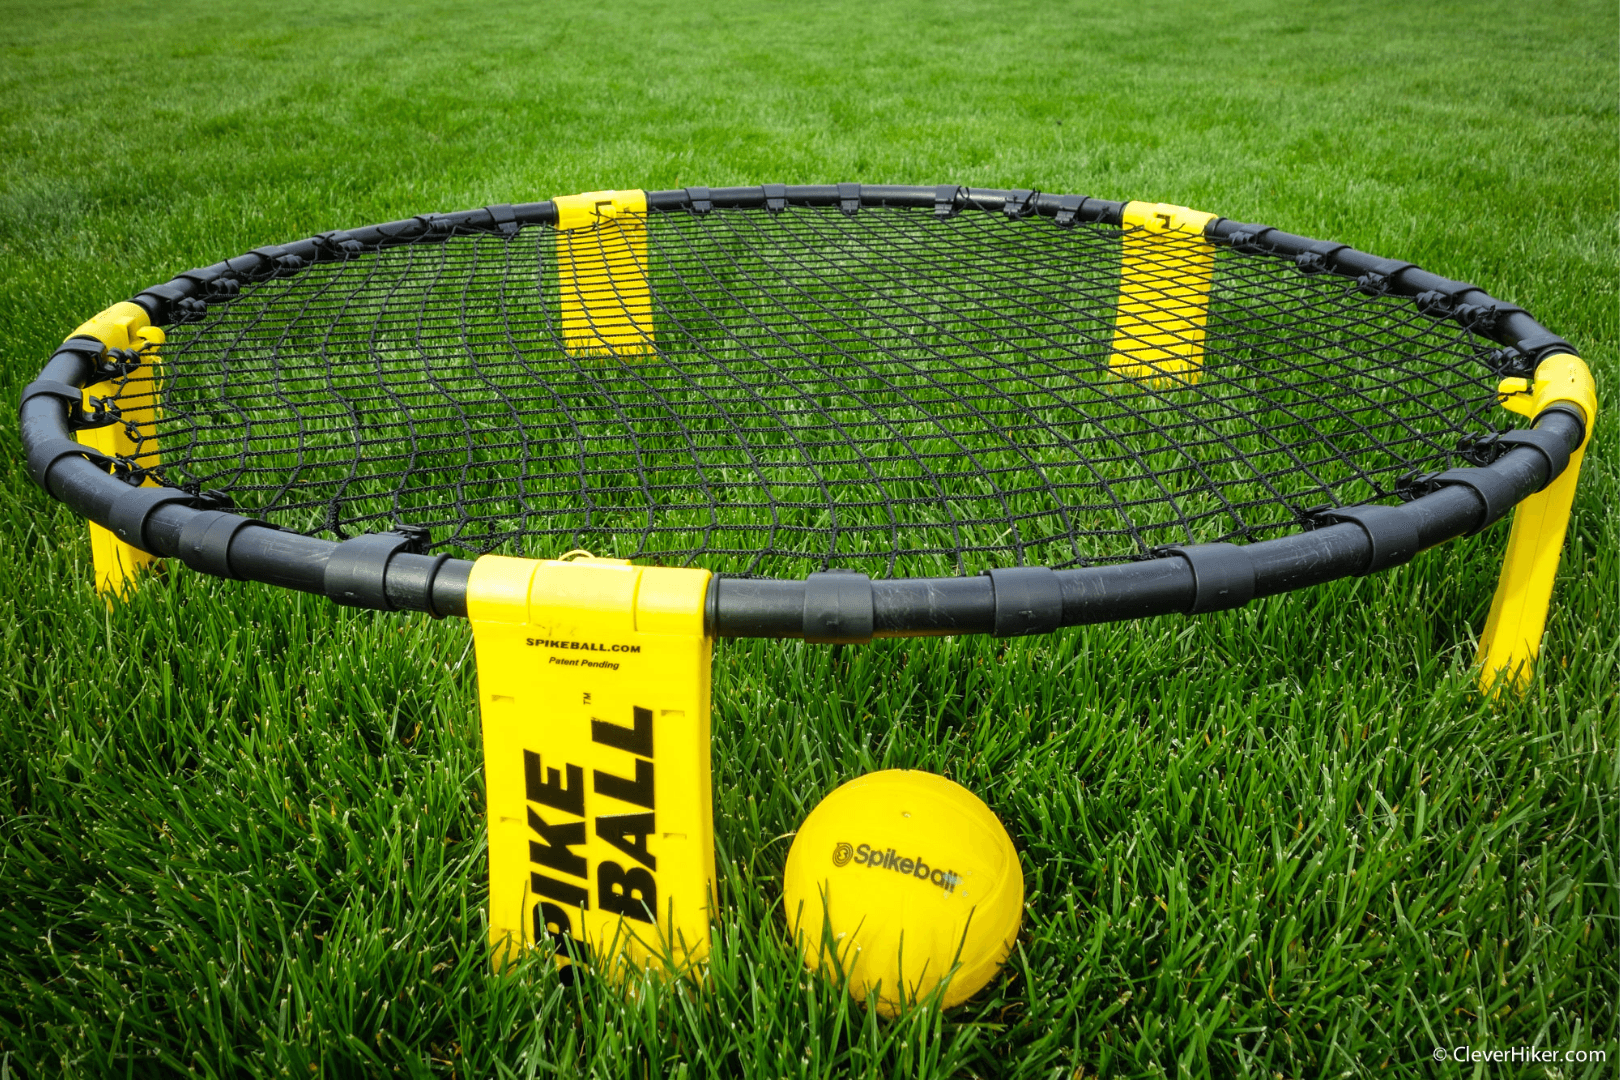 Spikeball: Rules, name, professional leagues and where to play